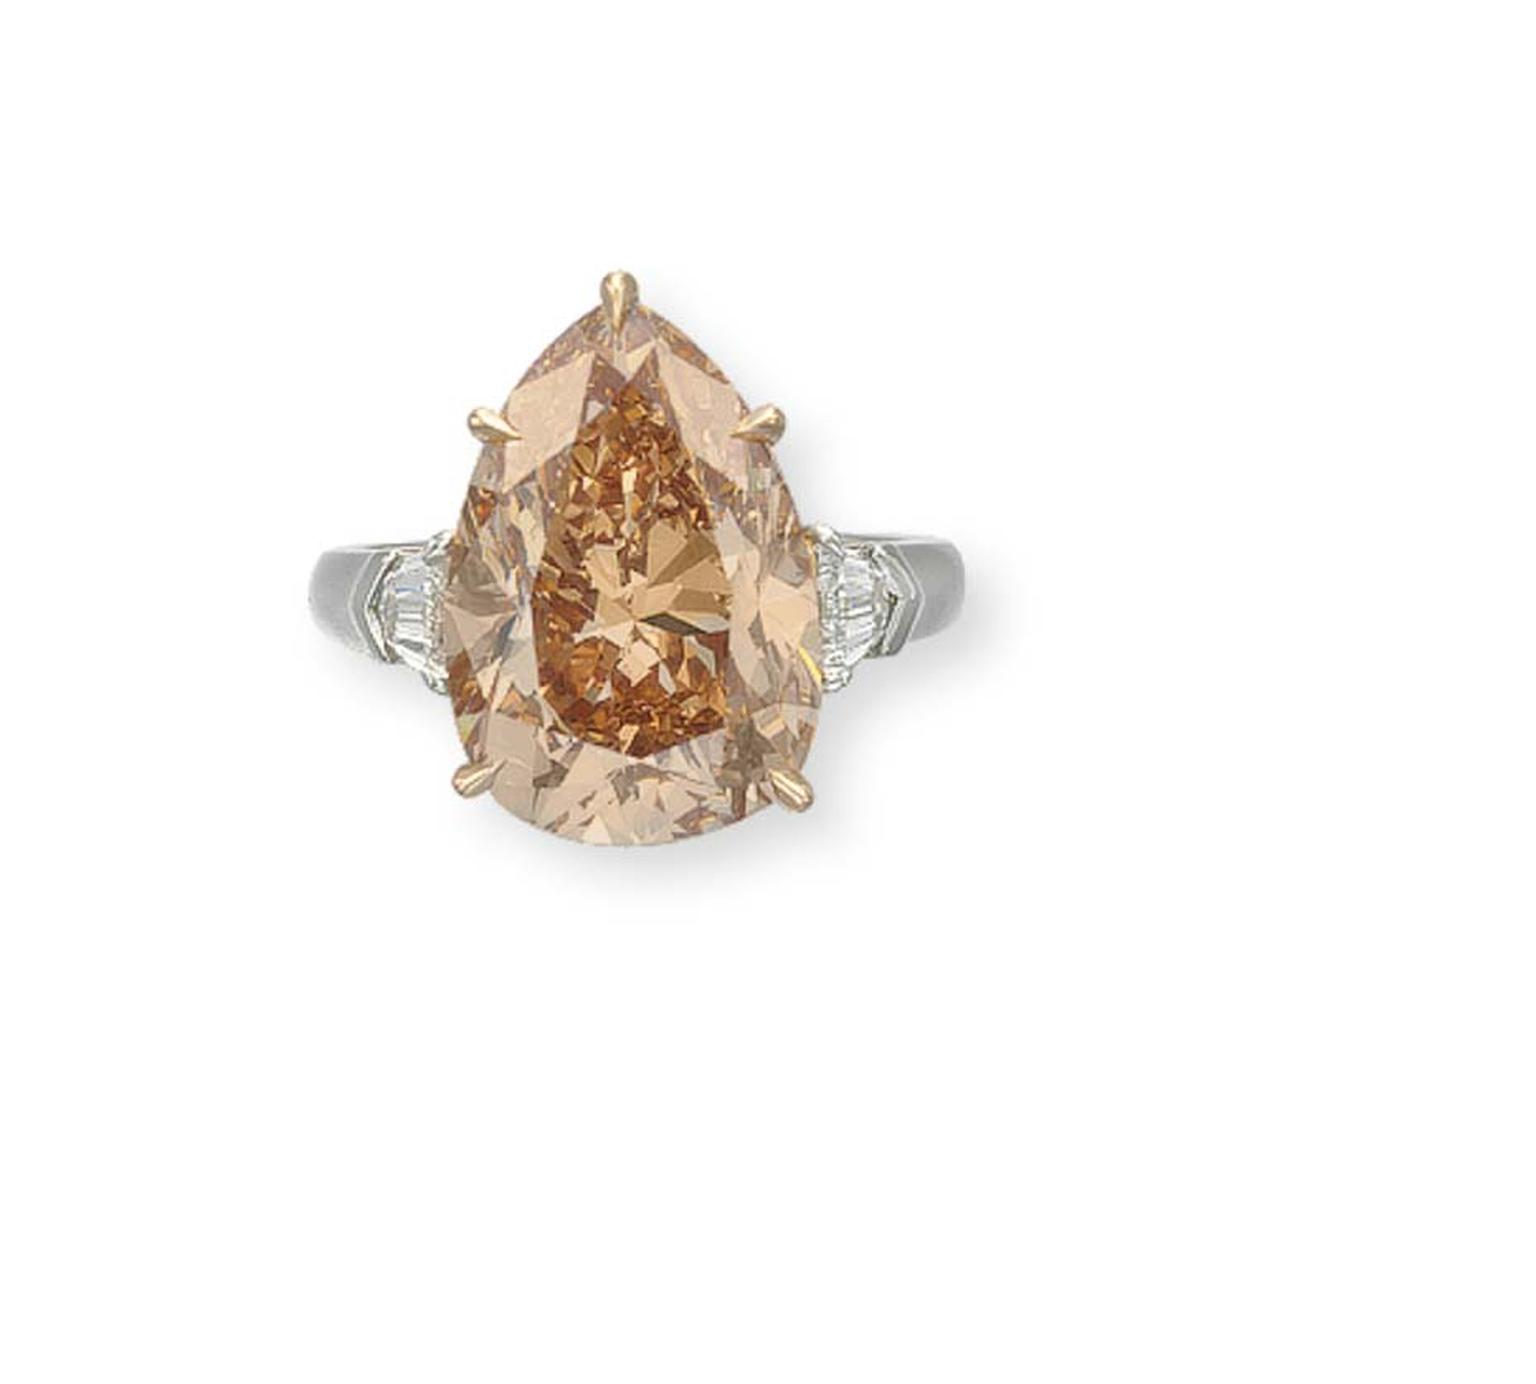 Christie's New York pear-shaped 9.73ct Fancy Brown-Pink Diamond ring with a pre-sale estimate of US$480,000-700,000 sold for a very respectable US$605,000.